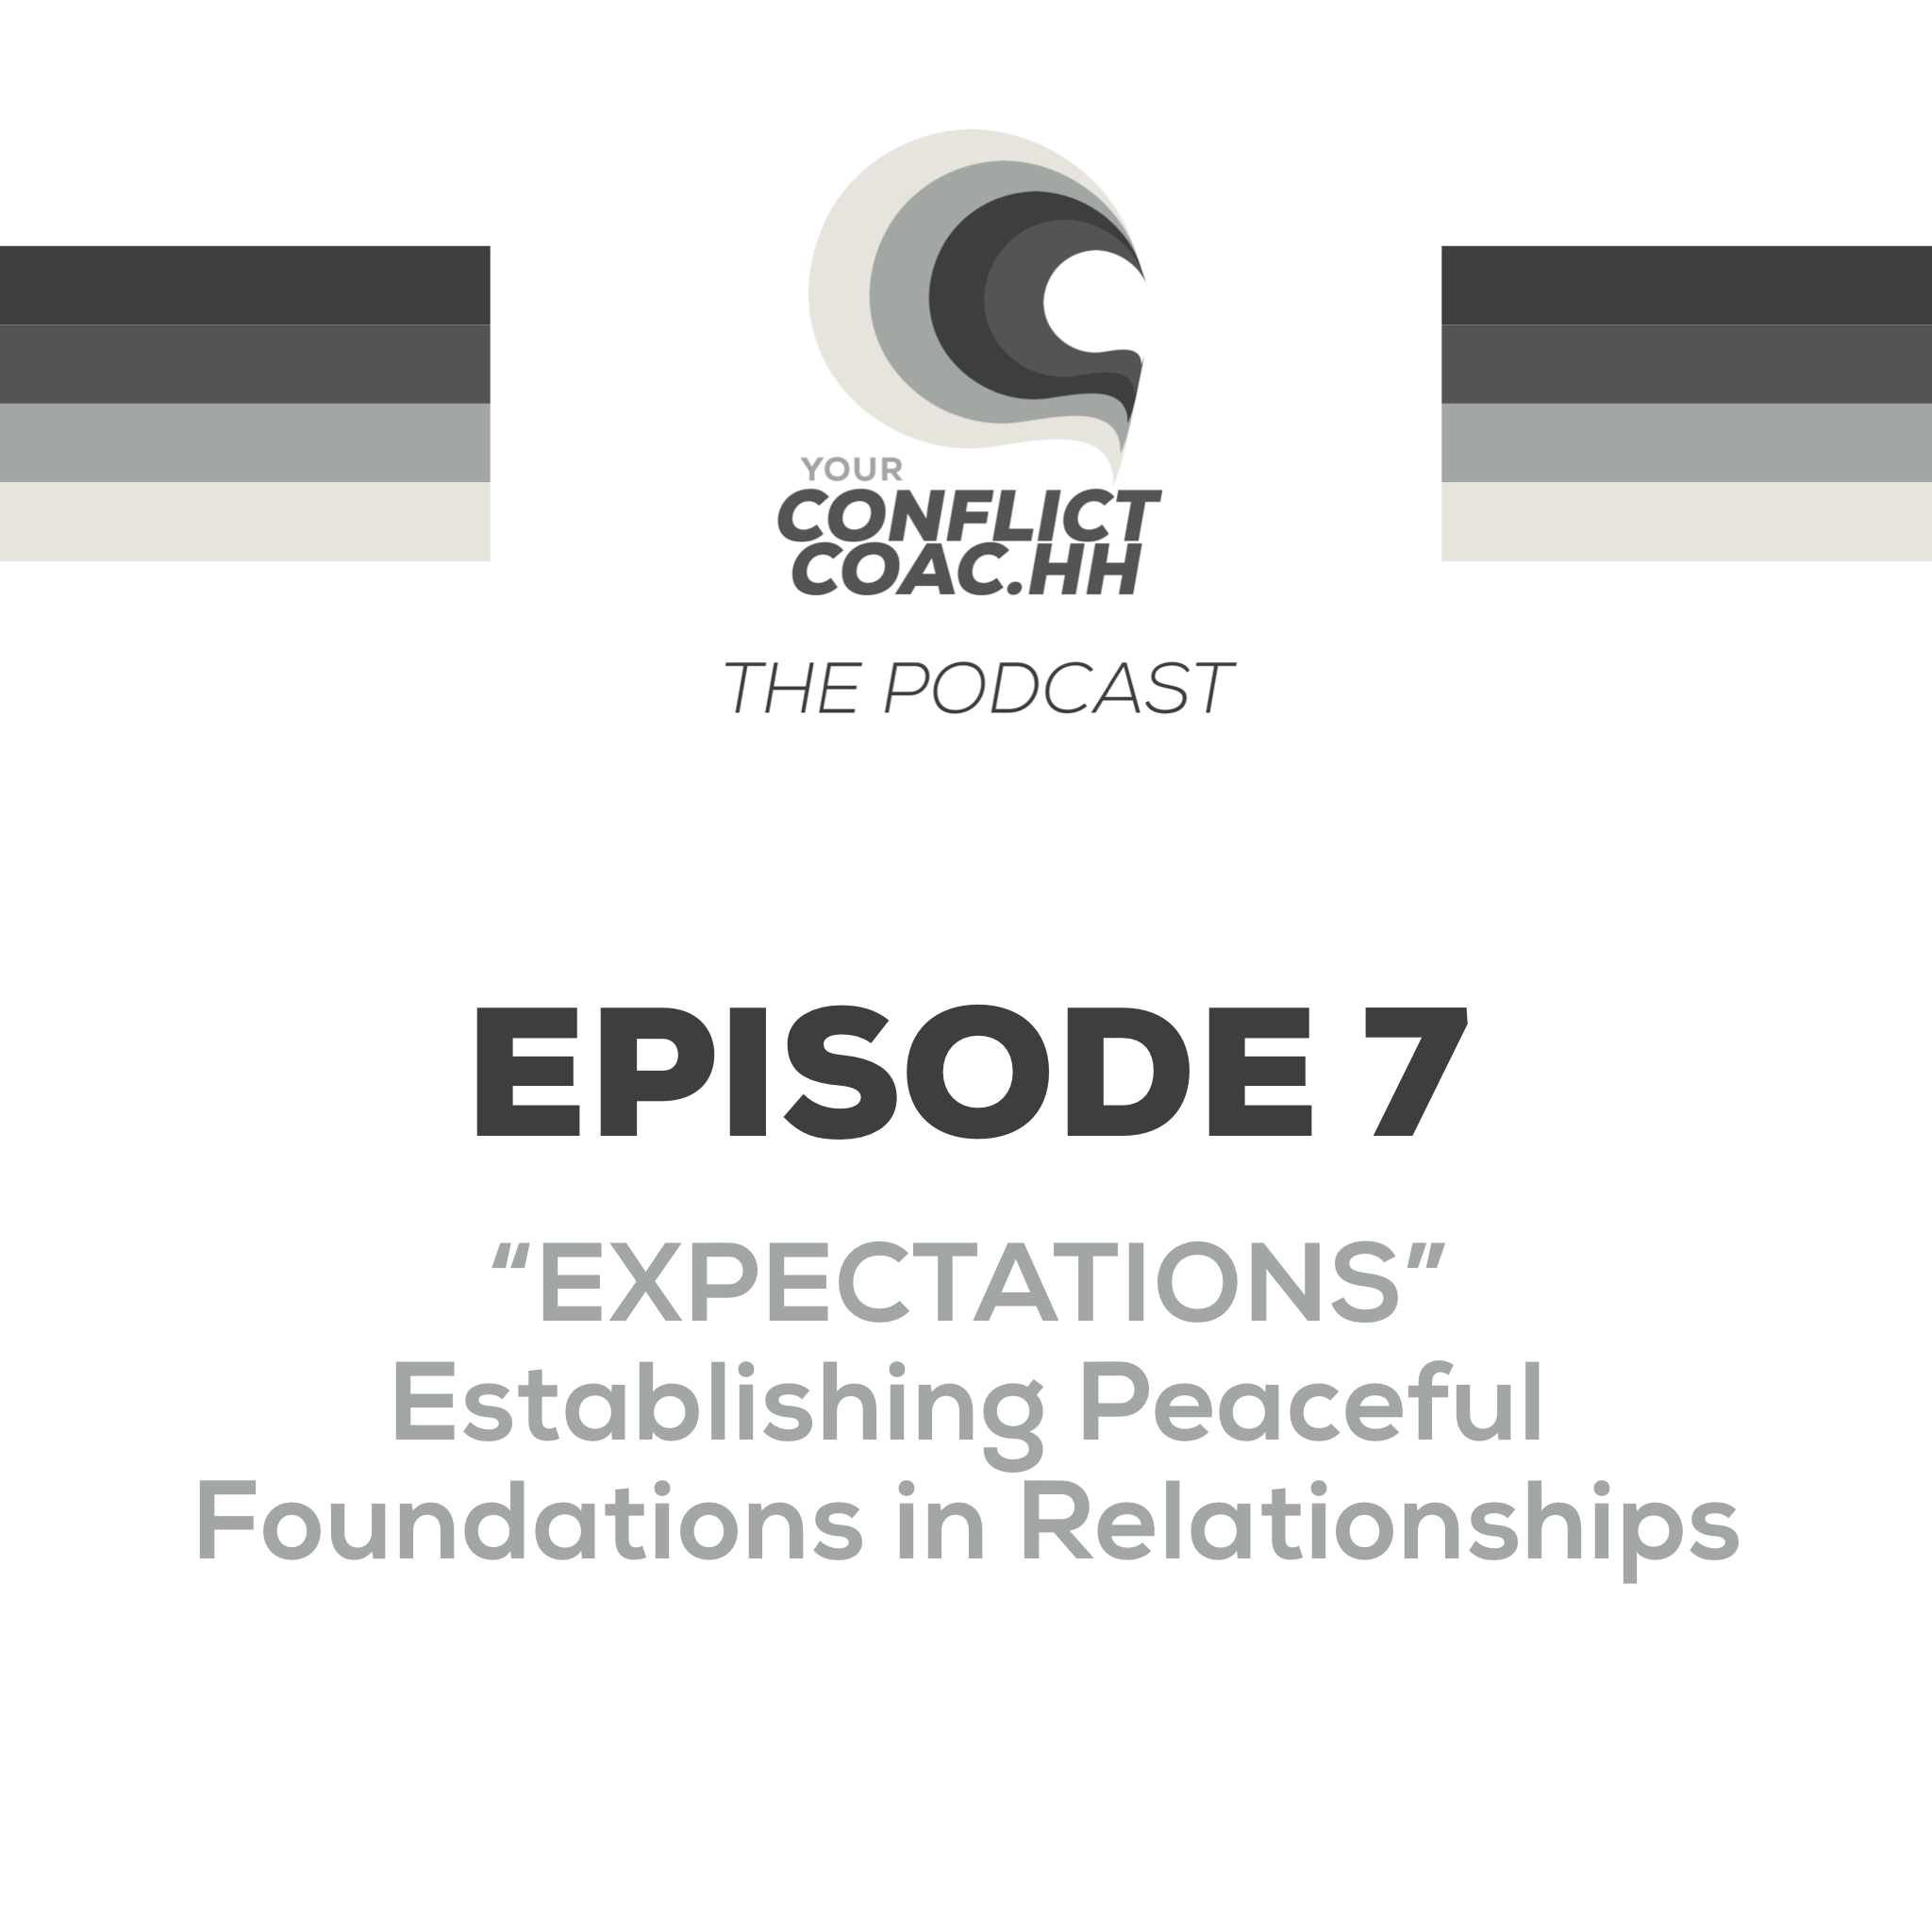 EXPECTATIONS - Establishing Peaceful Foundations in Relationships